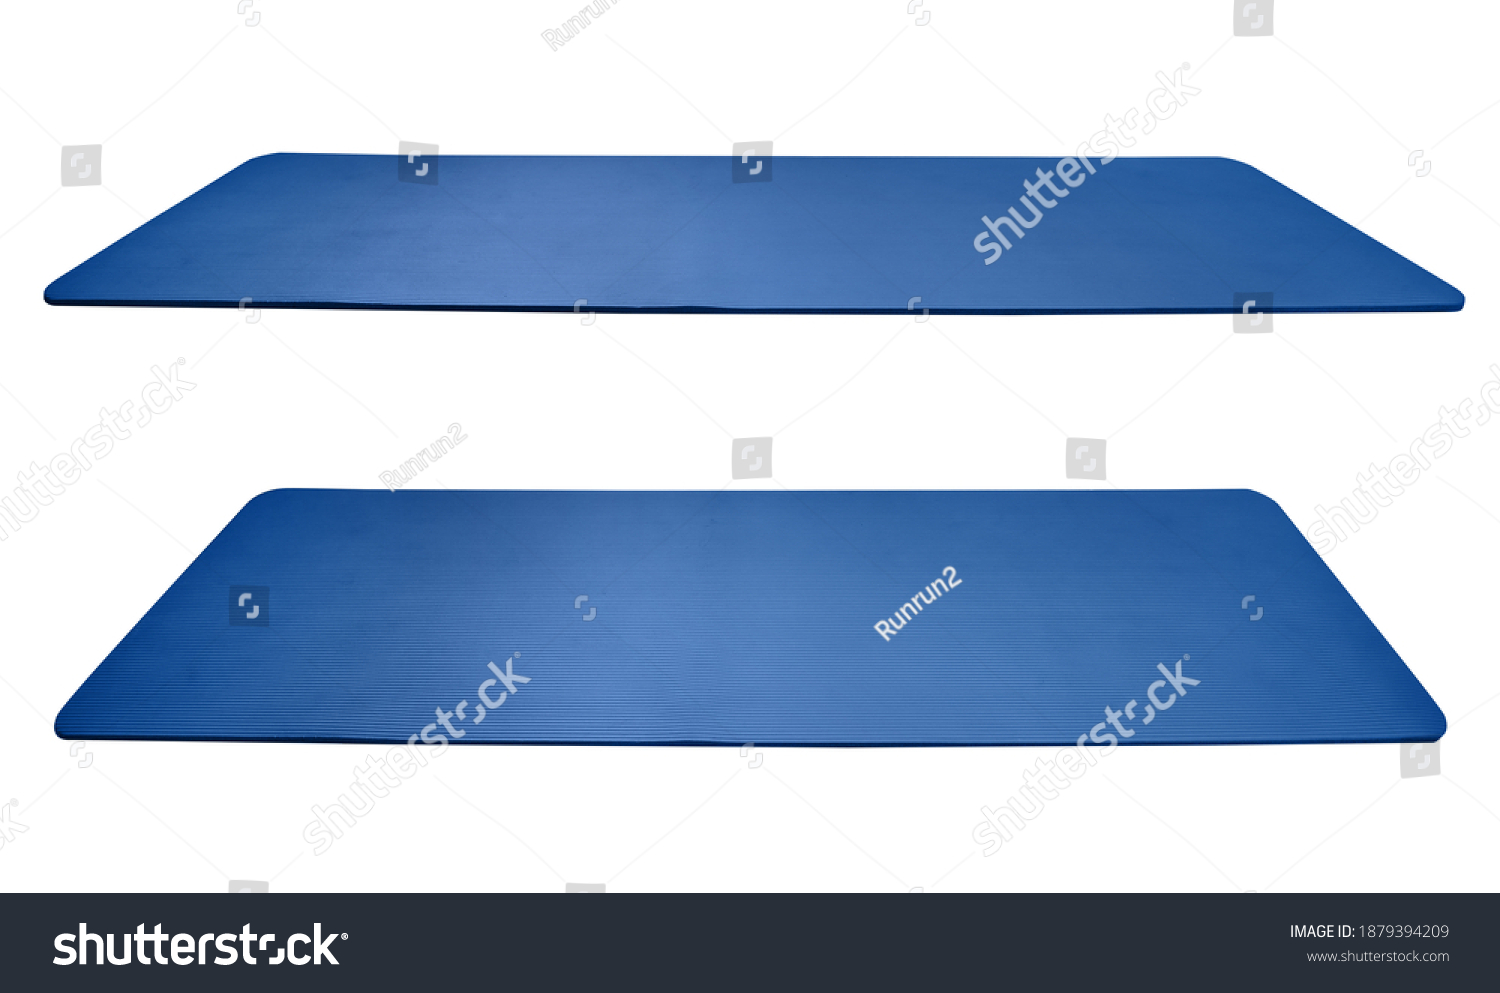 Blue rolled out yoga mat isolated on white background with clipping path #1879394209